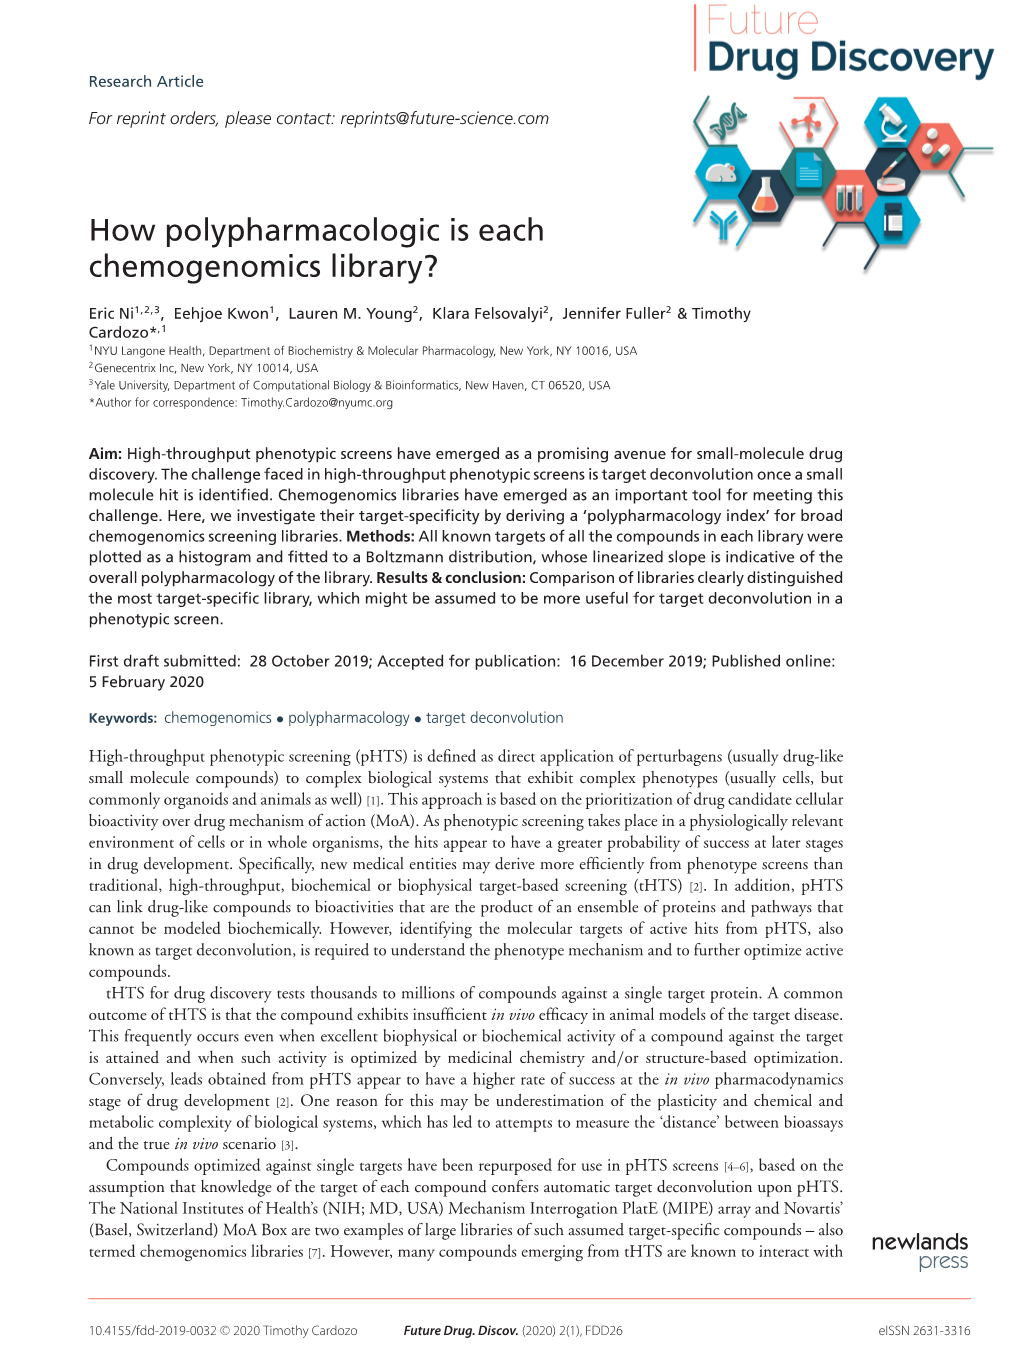 How Polypharmacologic Is Each Chemogenomics Library?